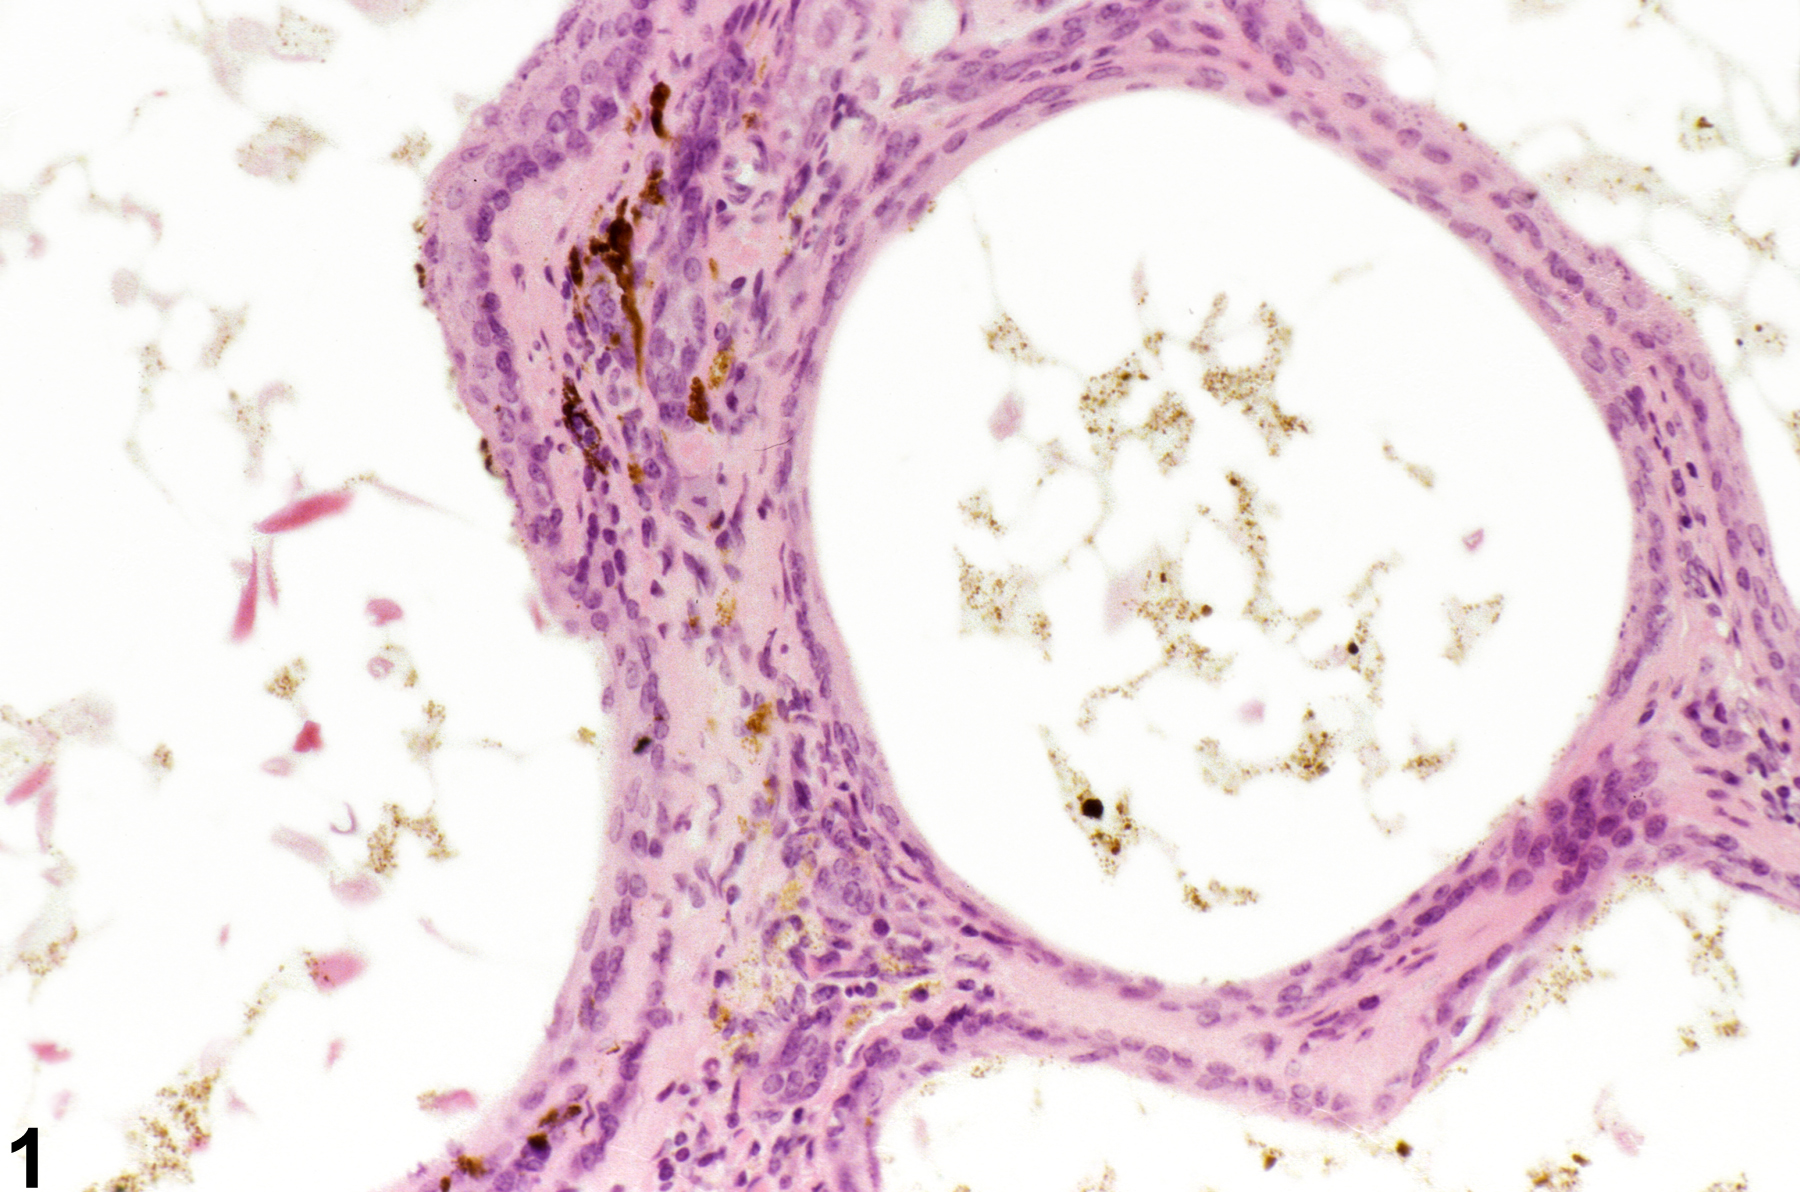 Image of pigment in the clitoral gland from a female B6C3F1 mouse in a chronic study